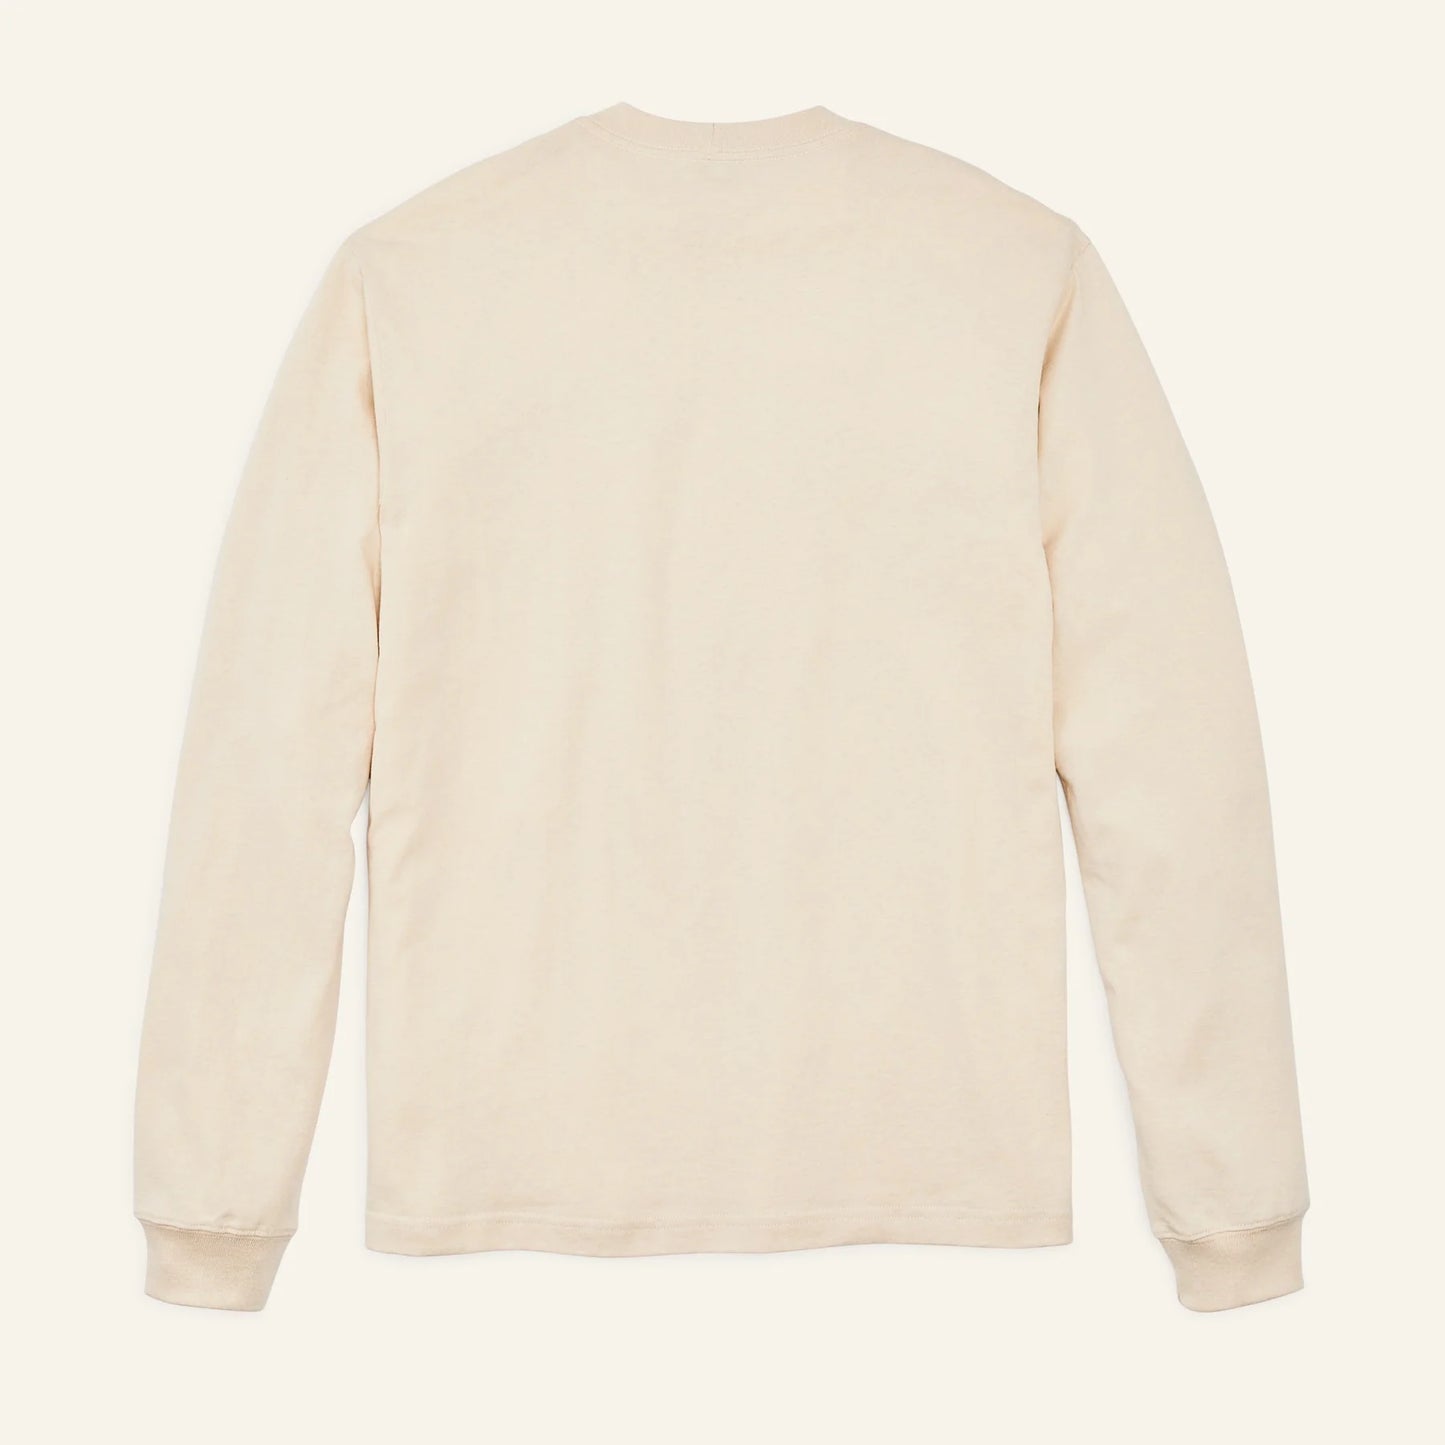 FILSON - LONG SLEEVE PIONEER GRAPHIC T SHIRT - NATURAL / STATE